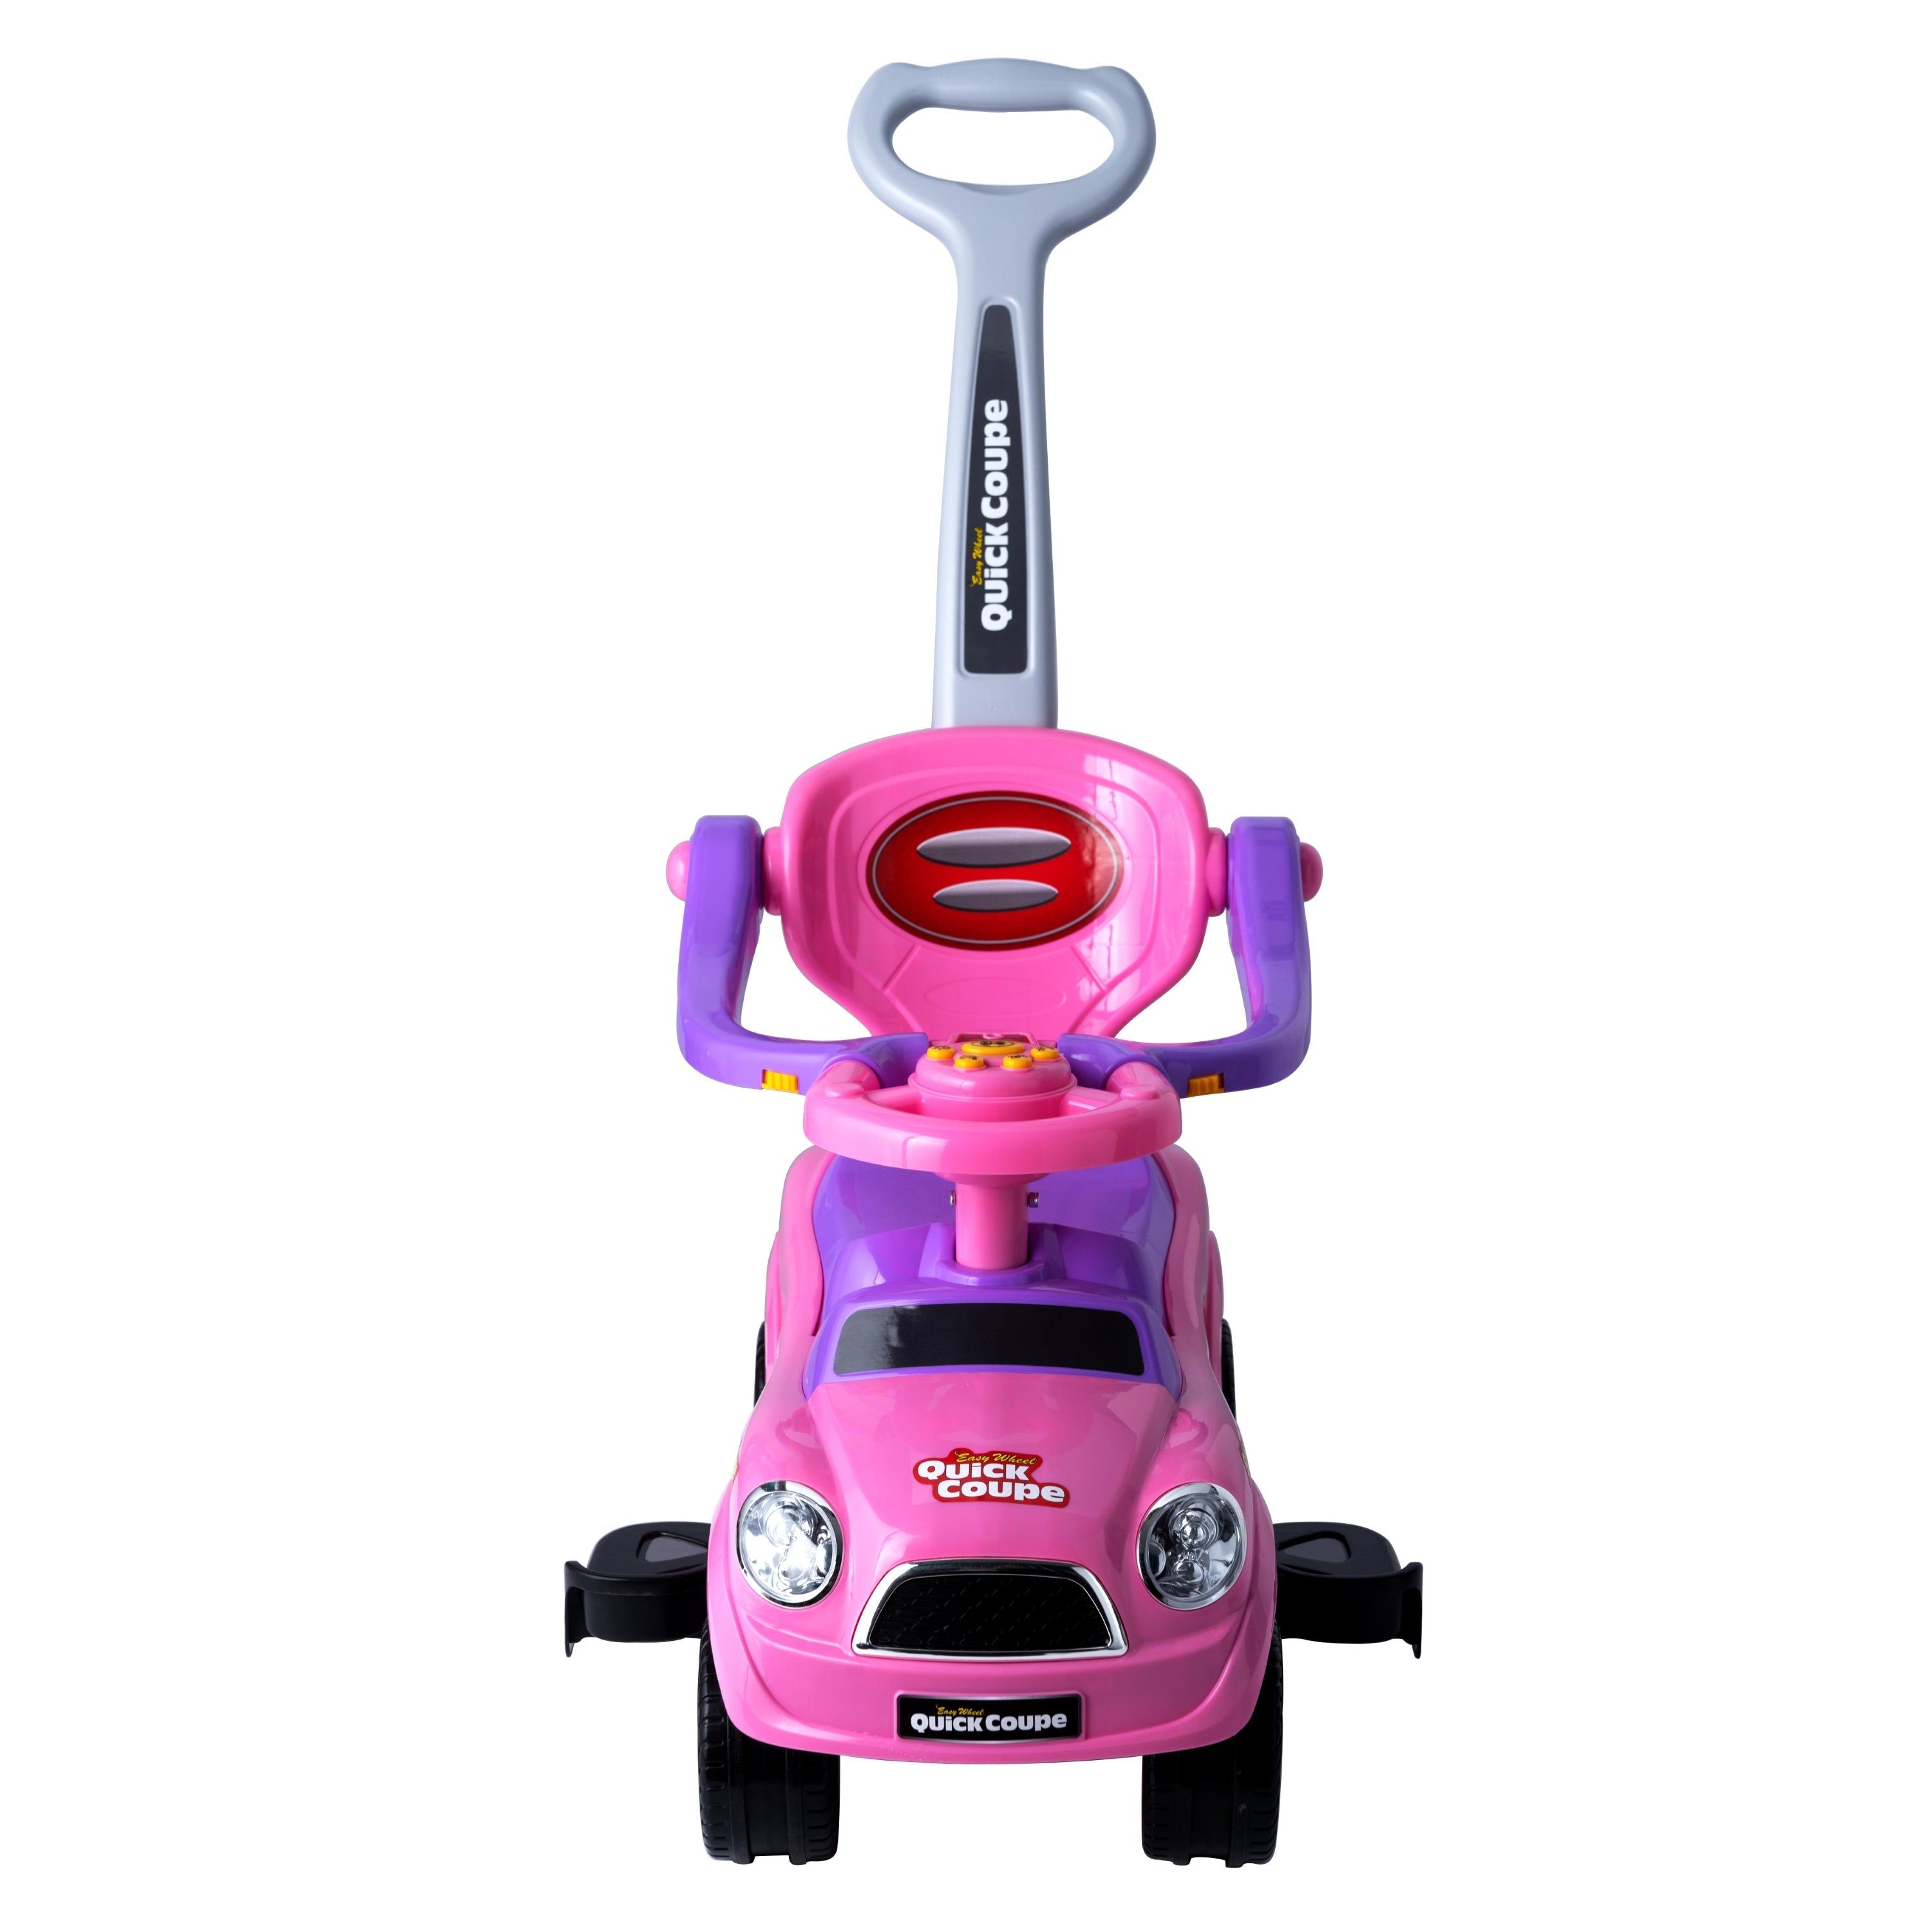 Freddo Toys Easy Wheel Quick Coupe 3 in 1, Stroller, Walker and Ride on Kids Cars CA - Ride On Toys Store